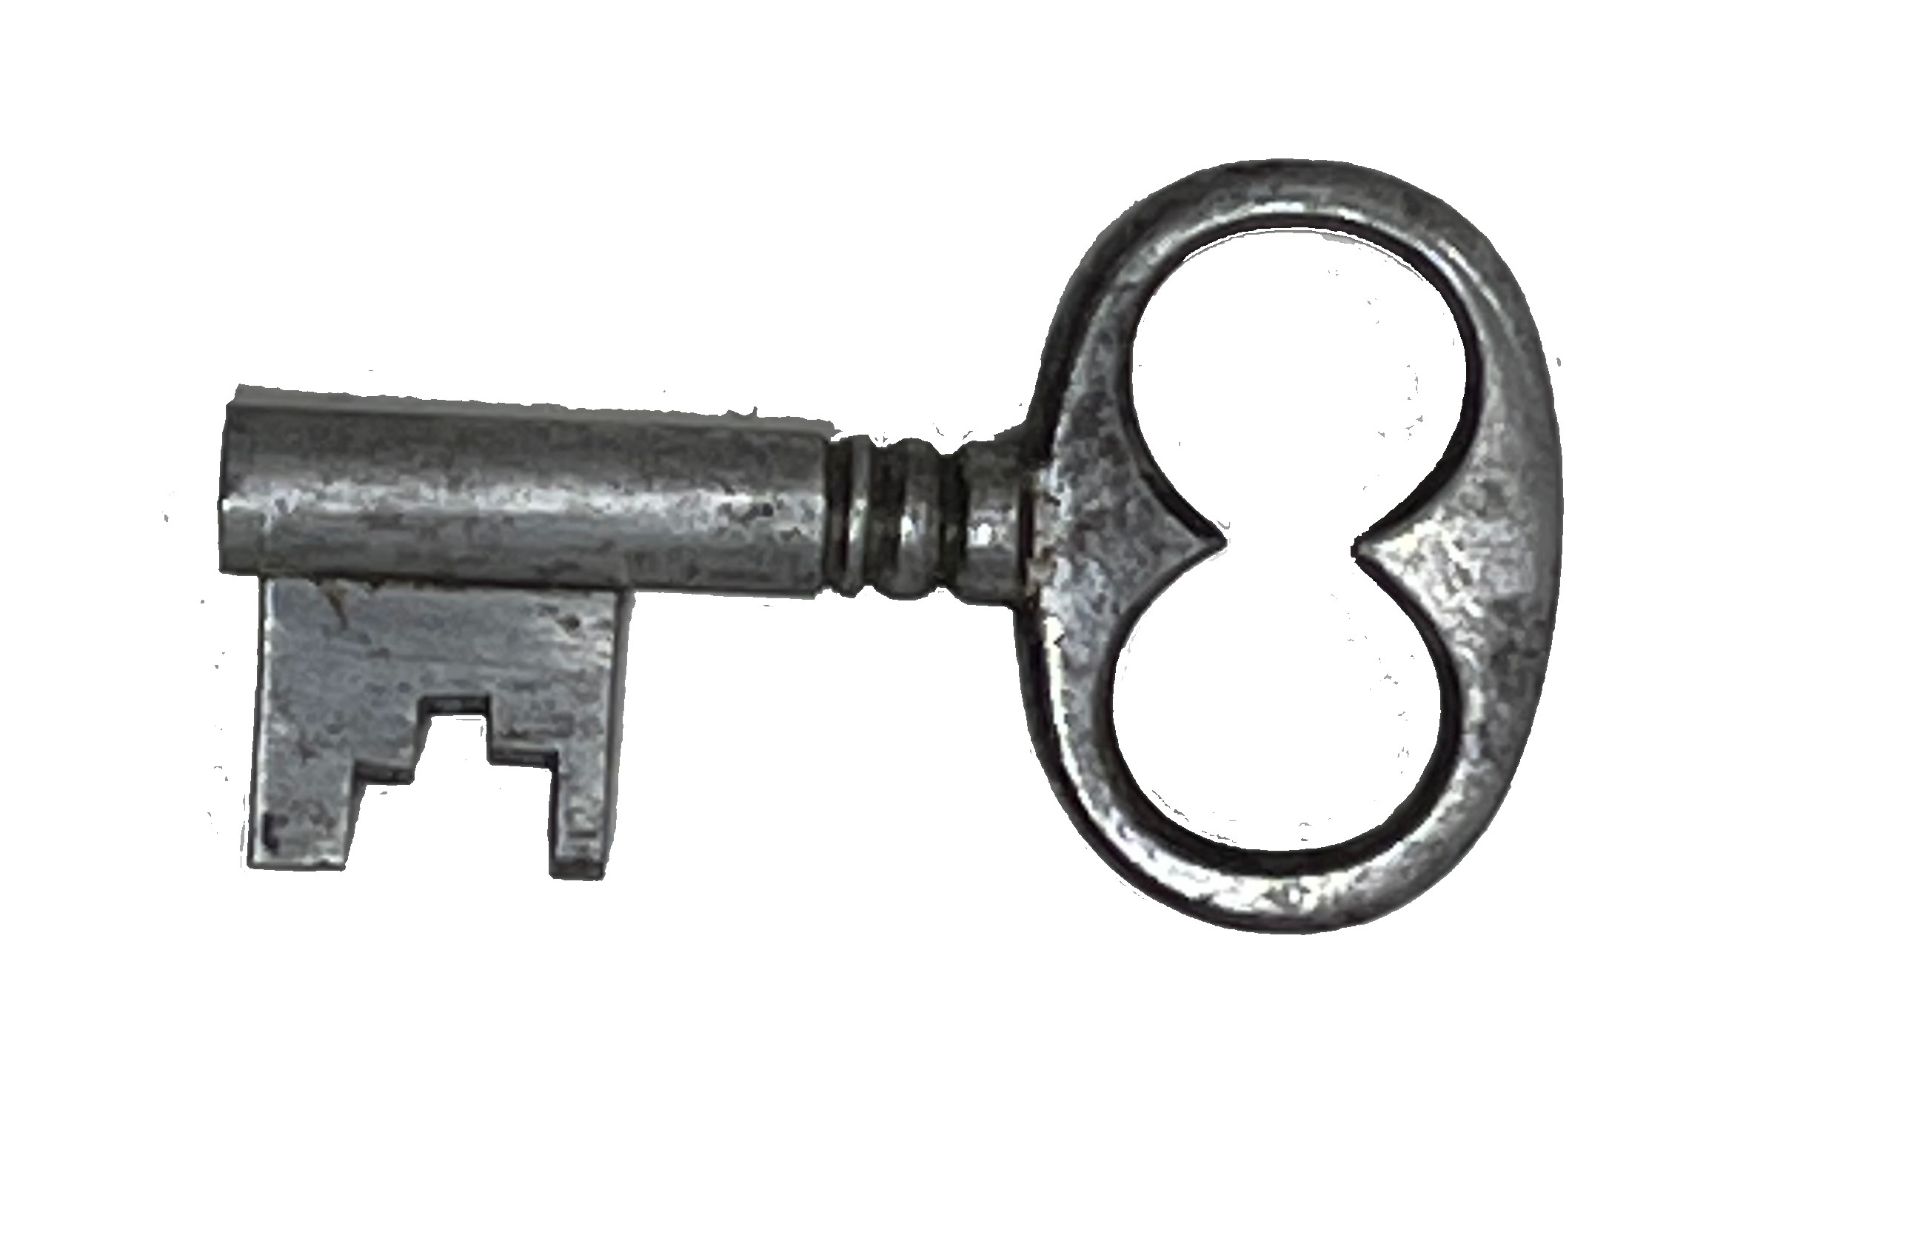 Fichet lock. Miniature model lock with anti-pick removal and four acid-proof tumblers. The key - Image 2 of 3